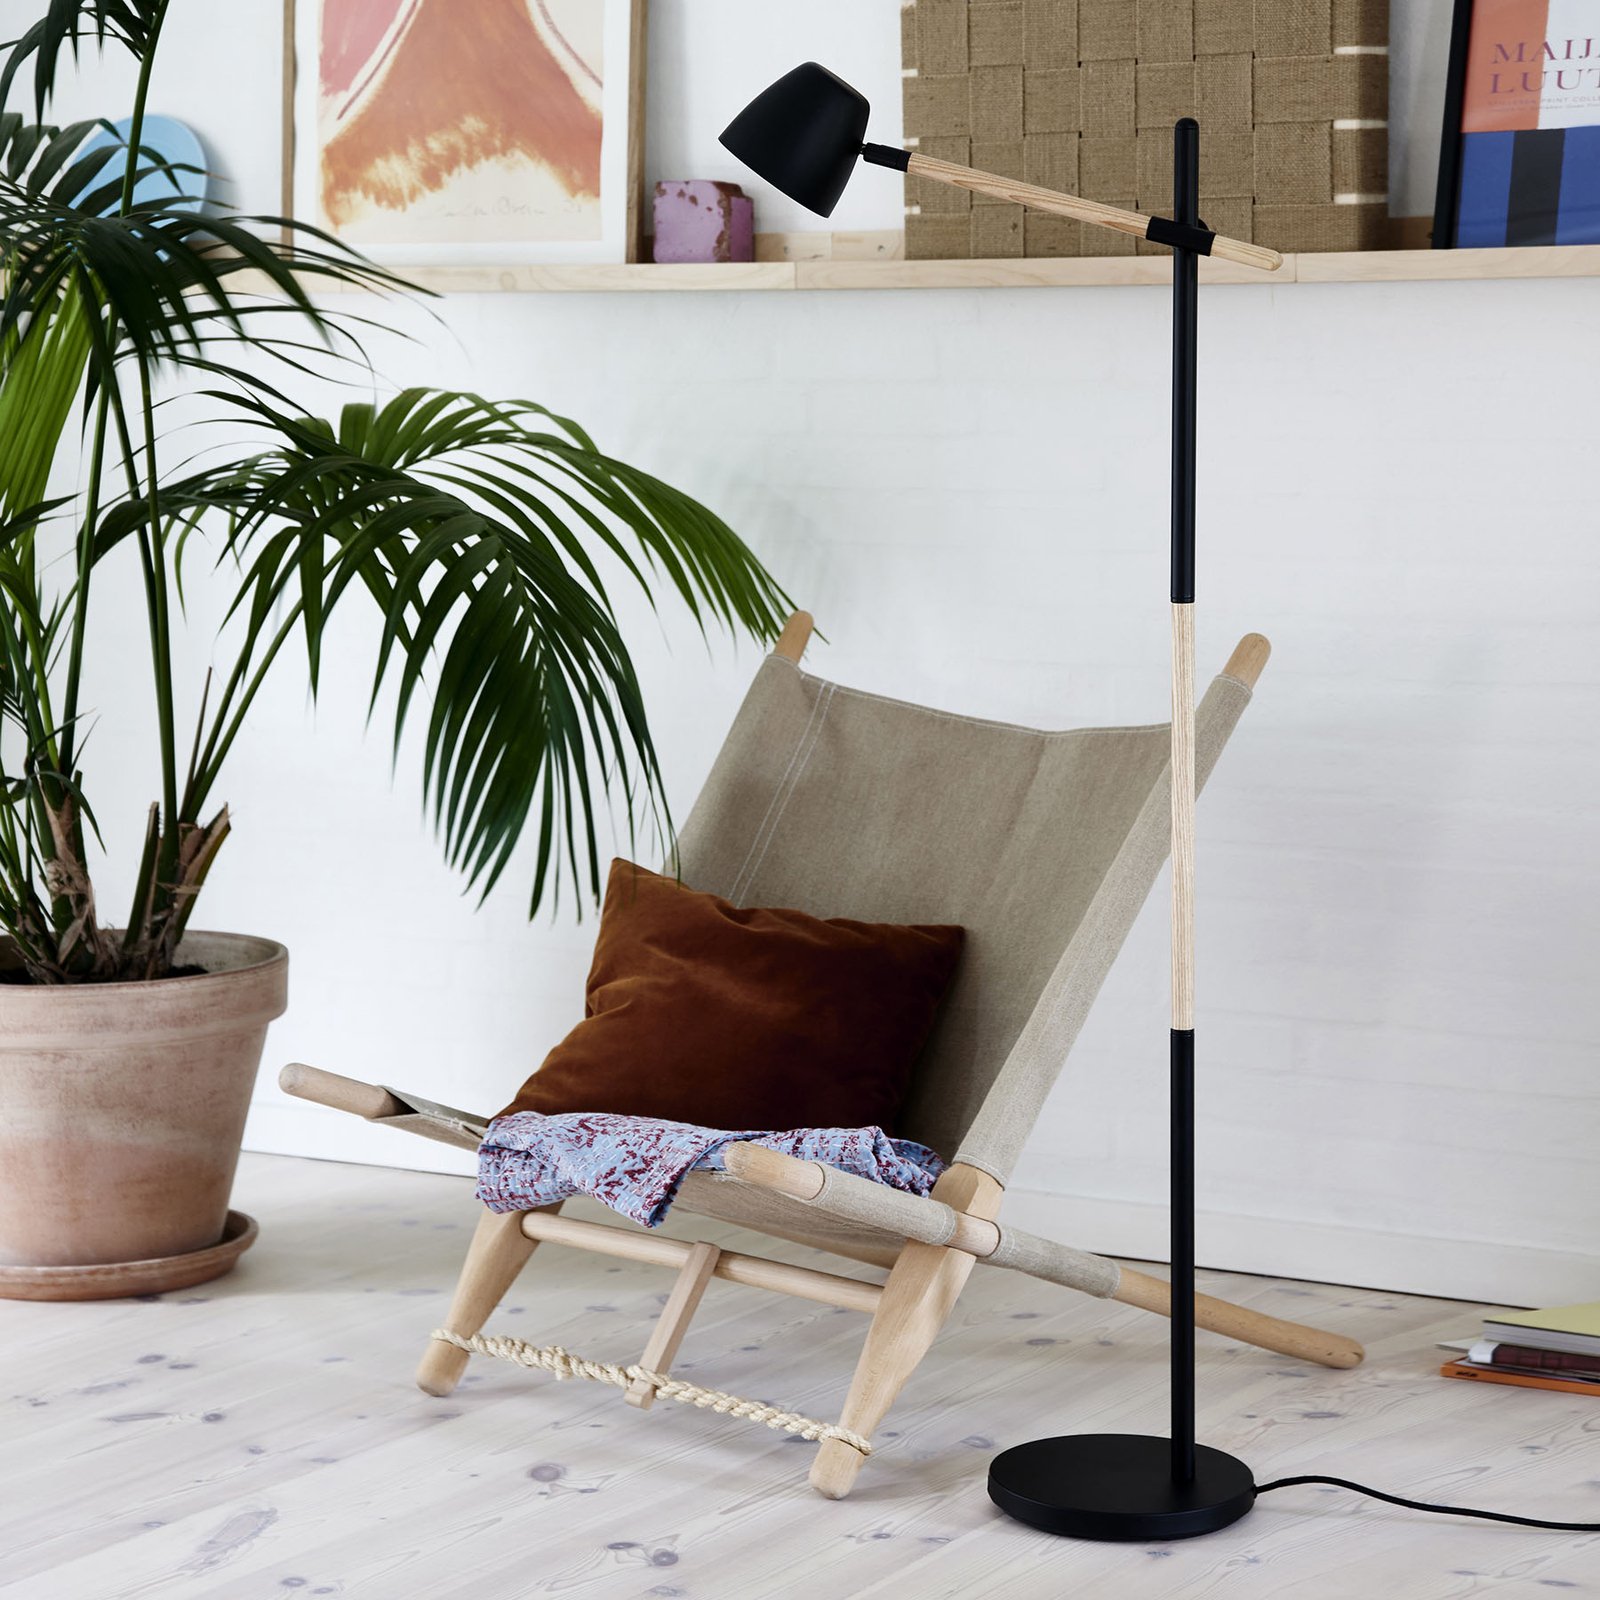 Theo floor lamp, made of ash wood